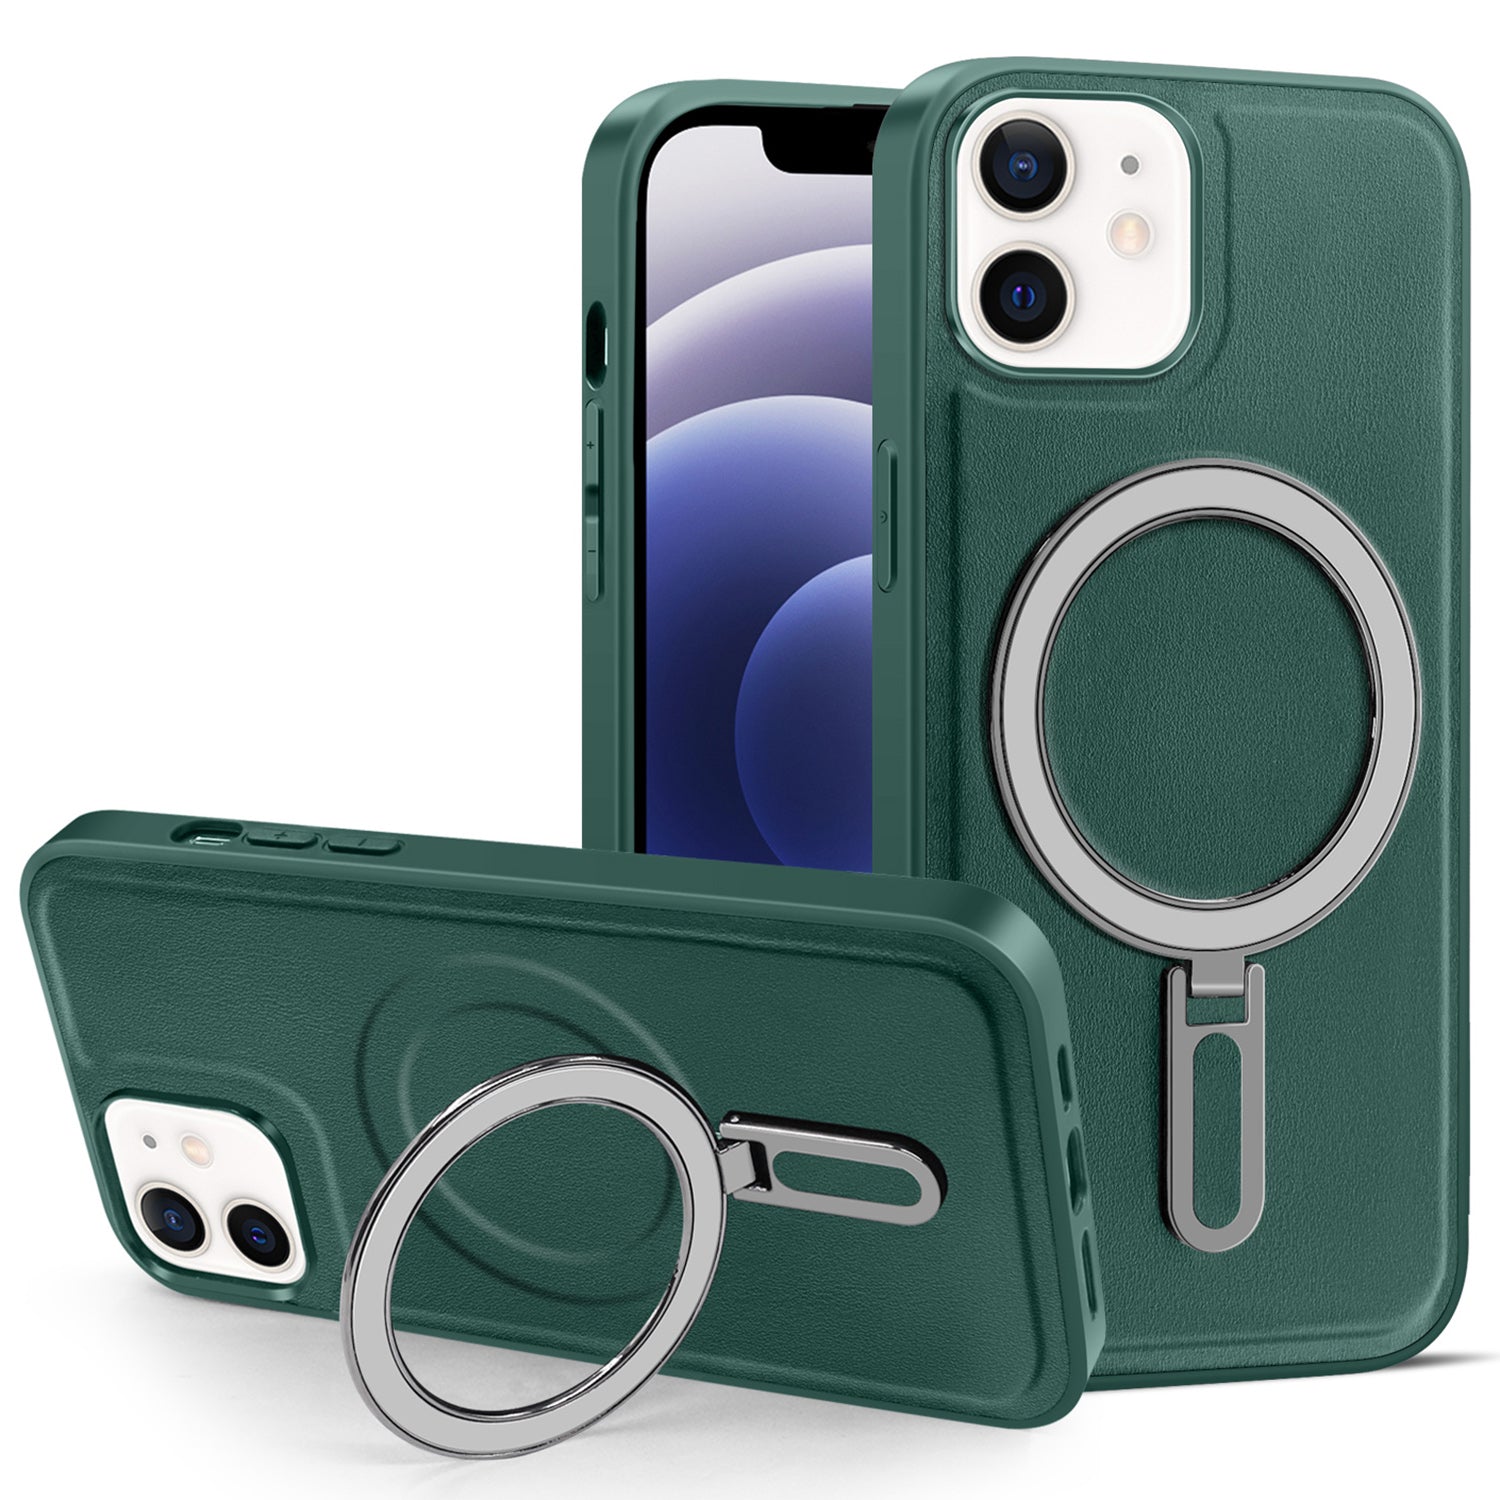 Uniqkart for iPhone 12 / 12 Pro 6.1 inch Phone Case Kickstand Design PU Leather Coated PC+TPU Magnetic Cover - Green